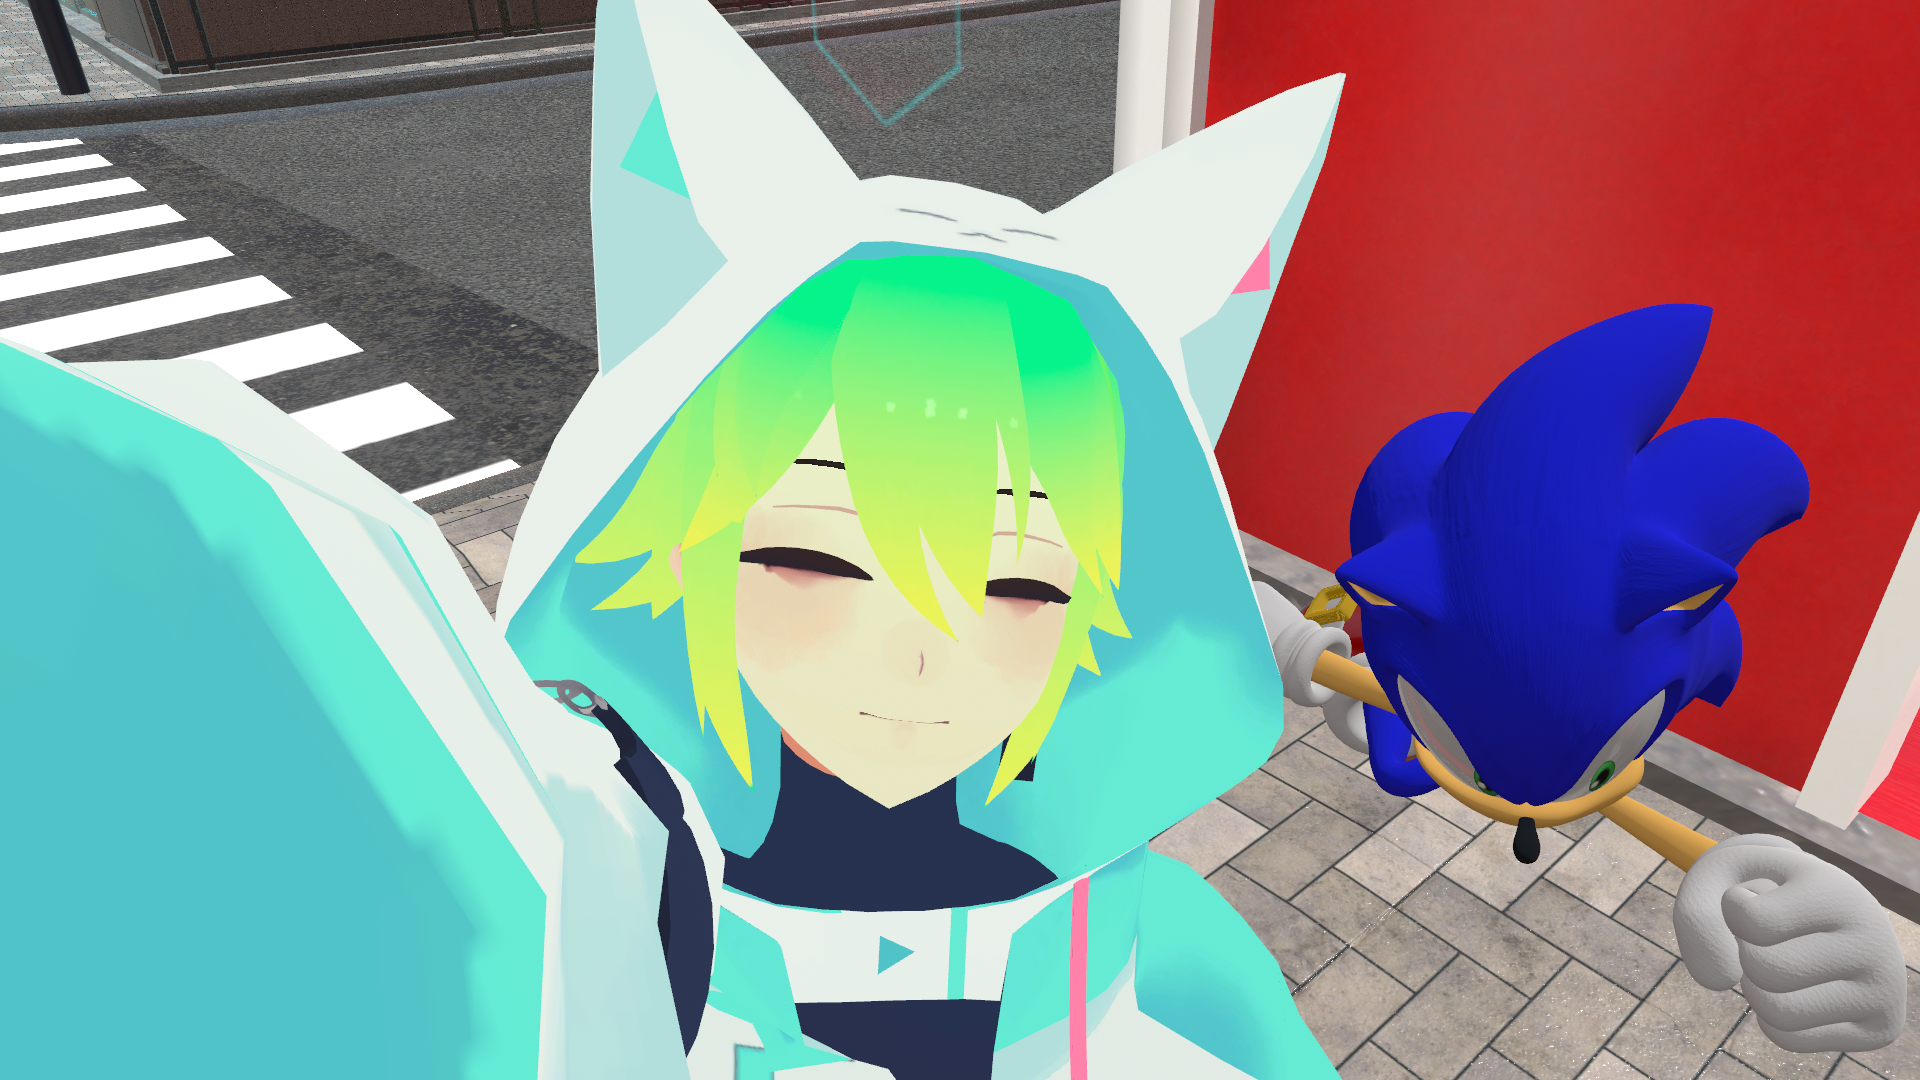 VRChat_1920x1080_2021-12-05_00-44-00.876.png